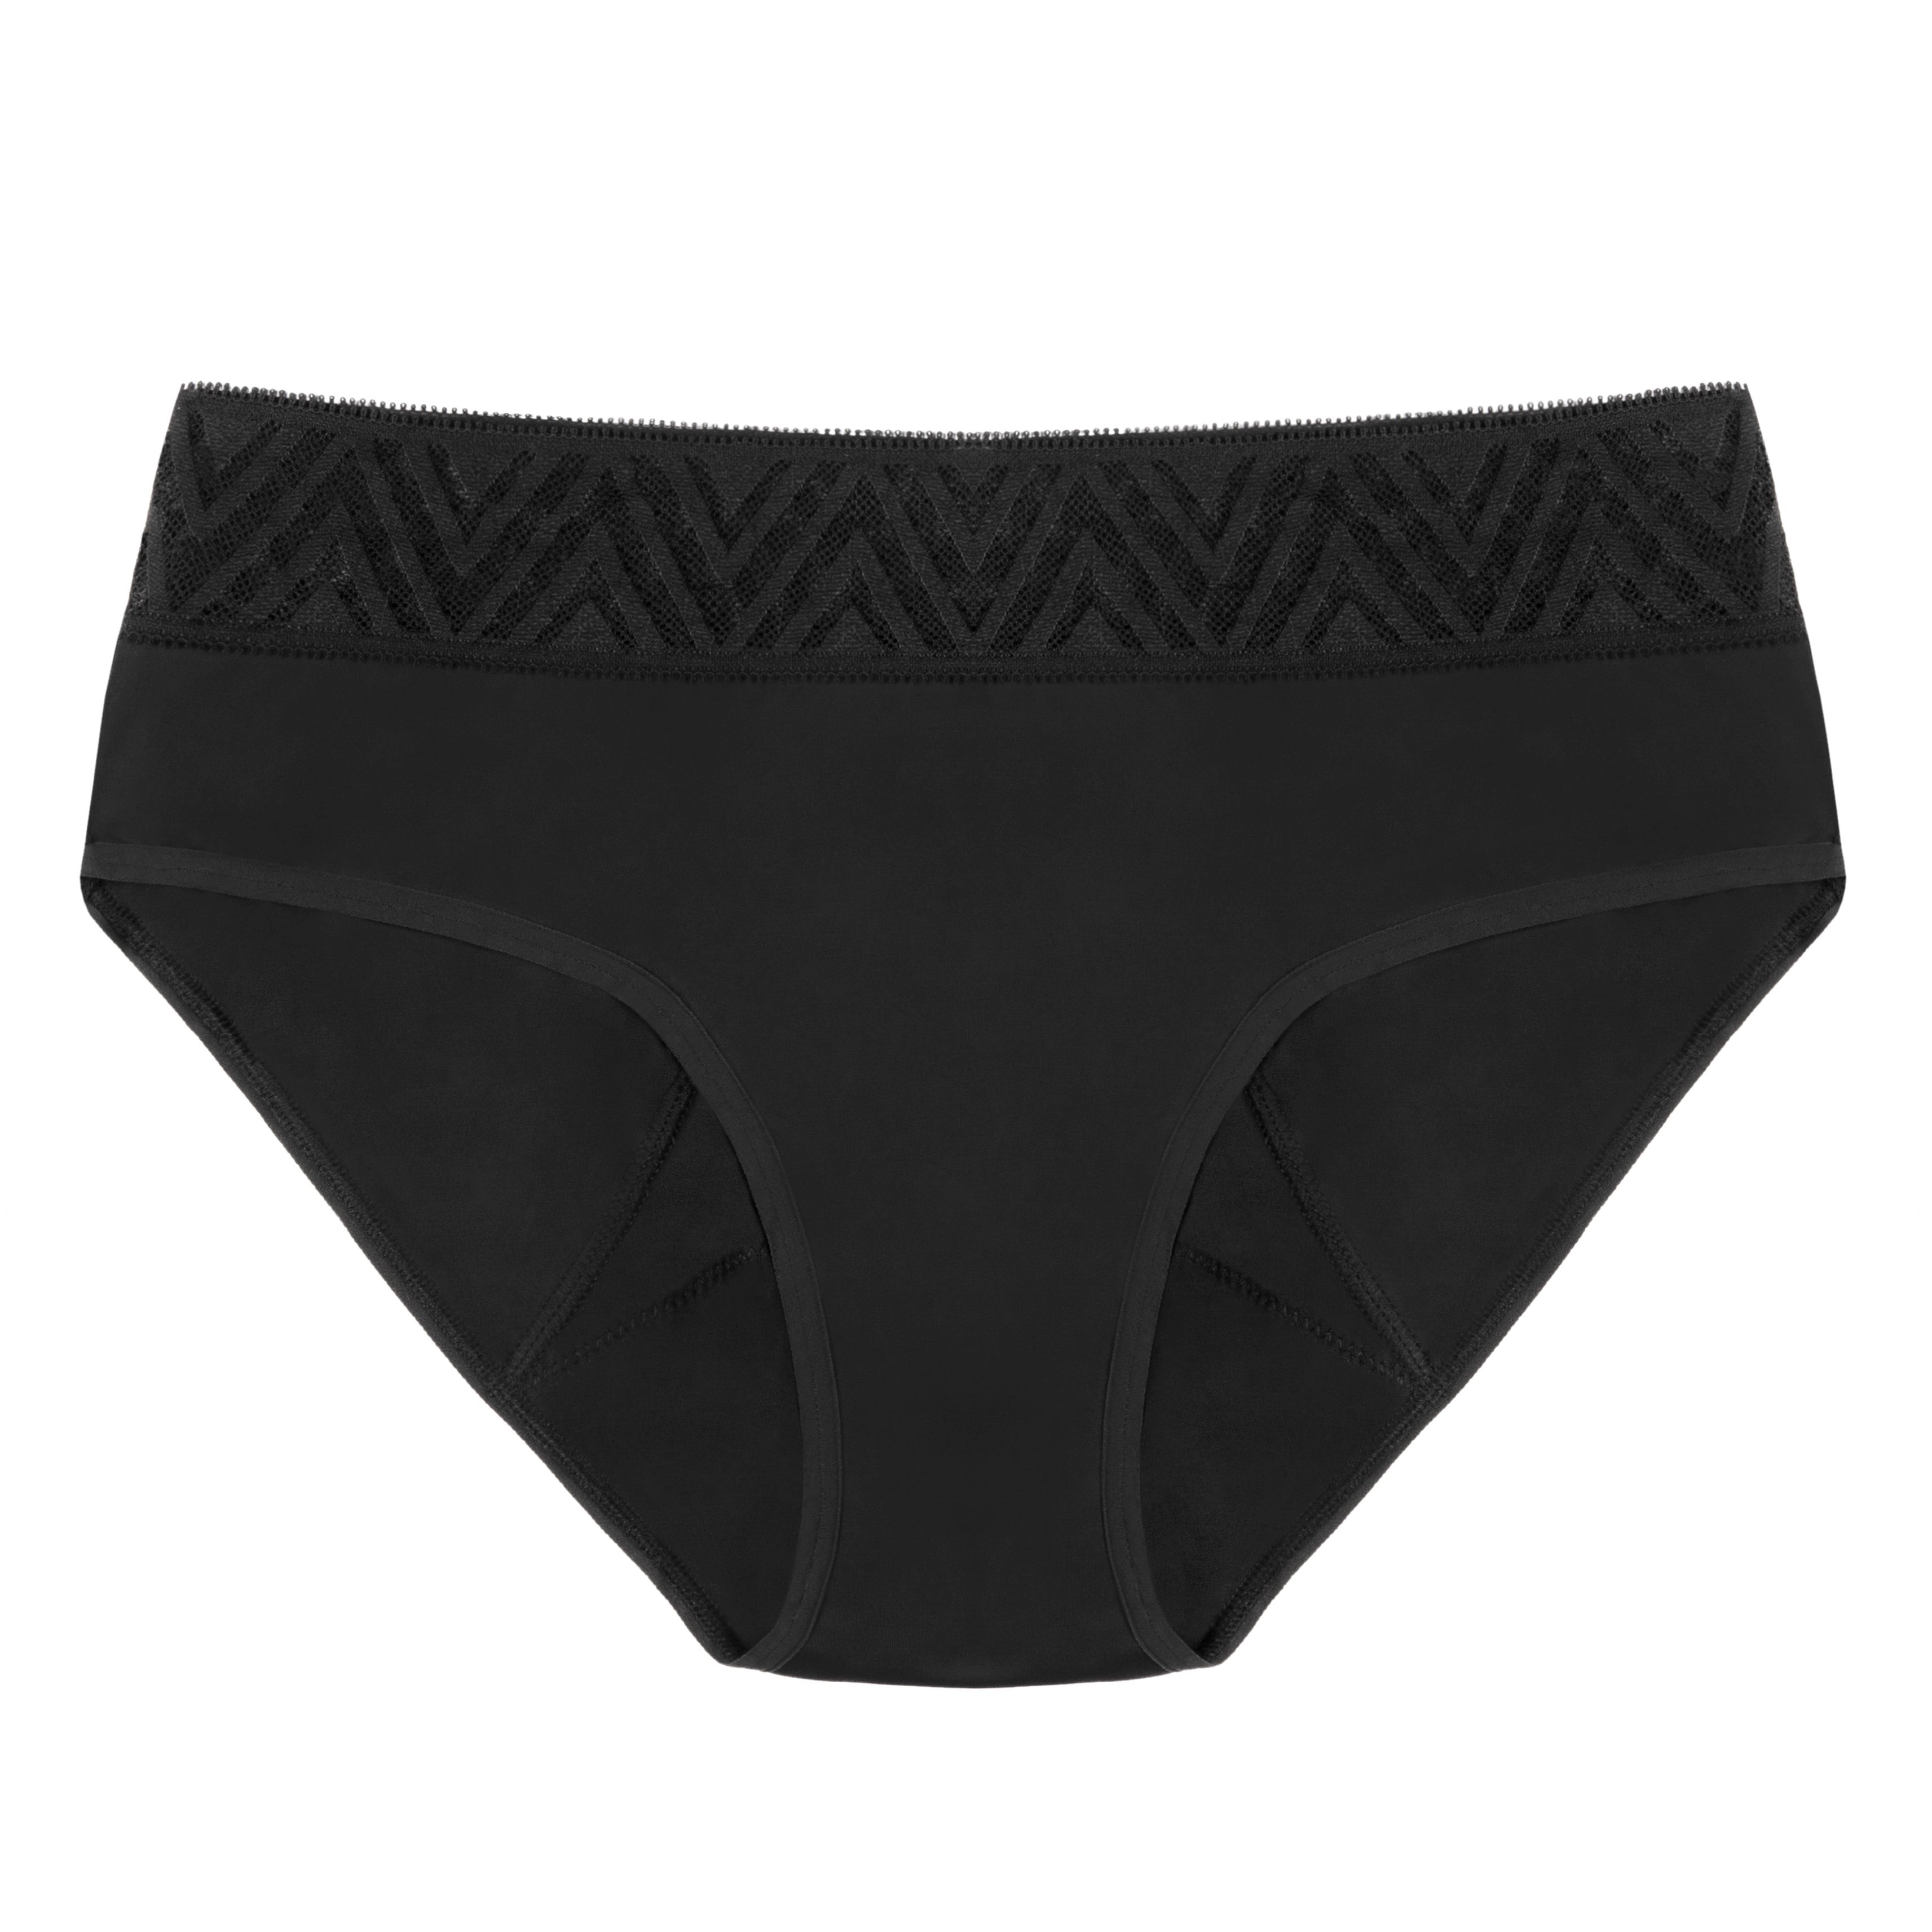 DISCThinx Period Proof Hiphugger Black - XS (New Geo Lace)